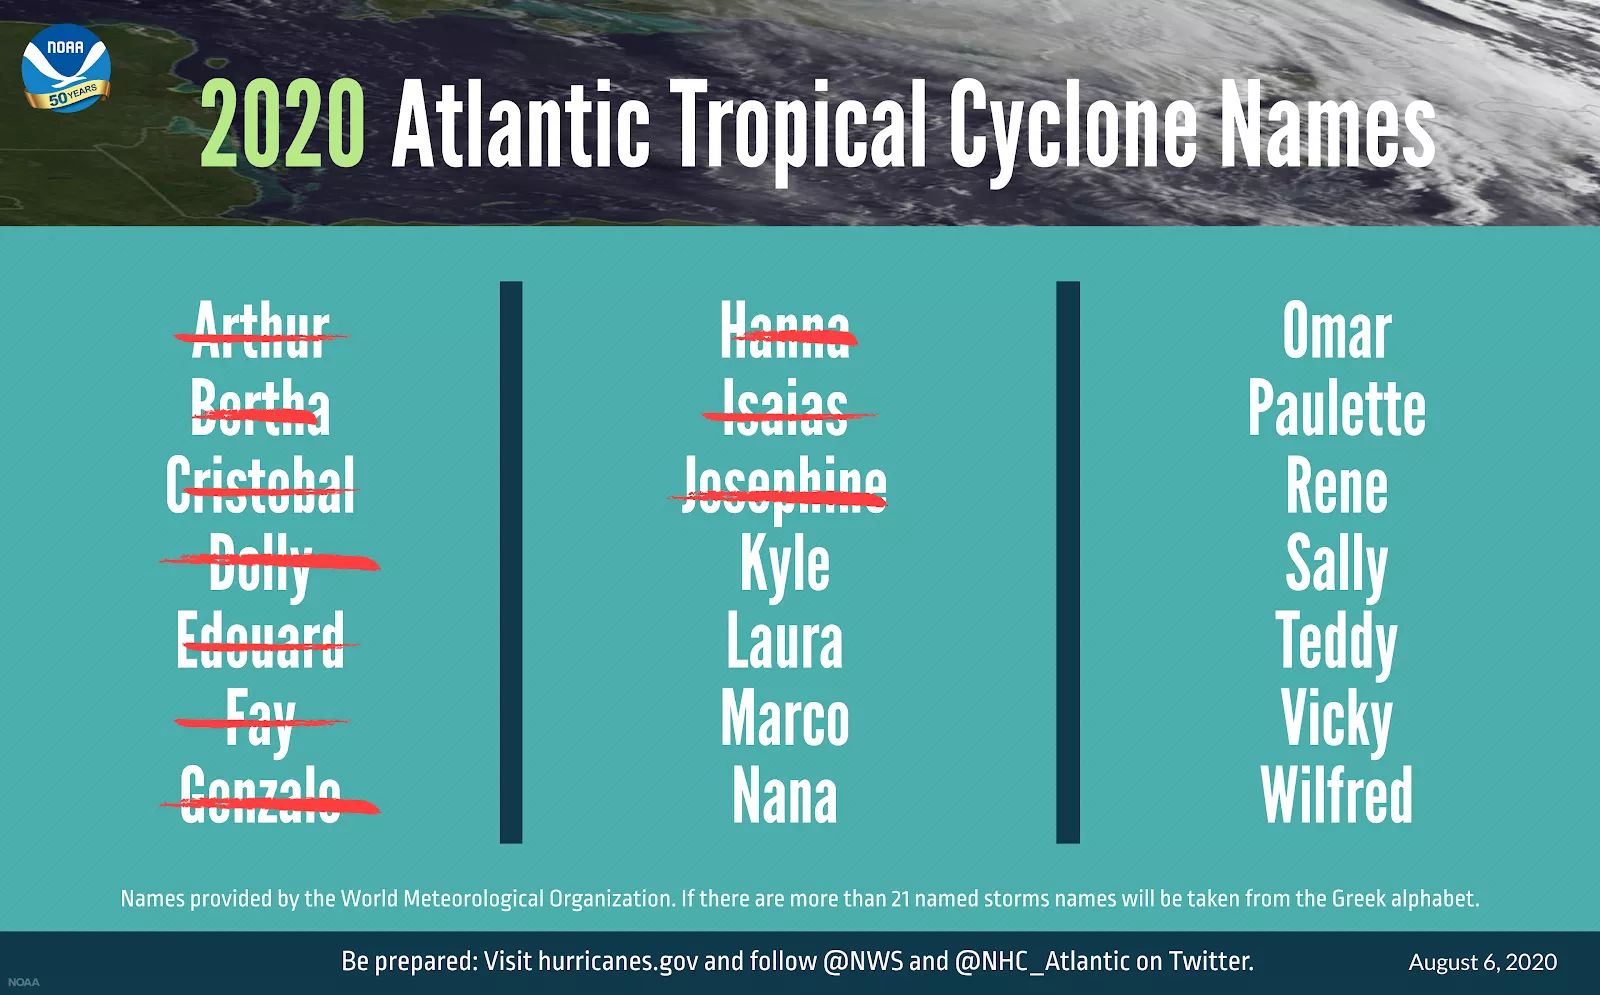 The 2020 Atlantic tropical cyclone names selected by the World Meteorological Organization. 